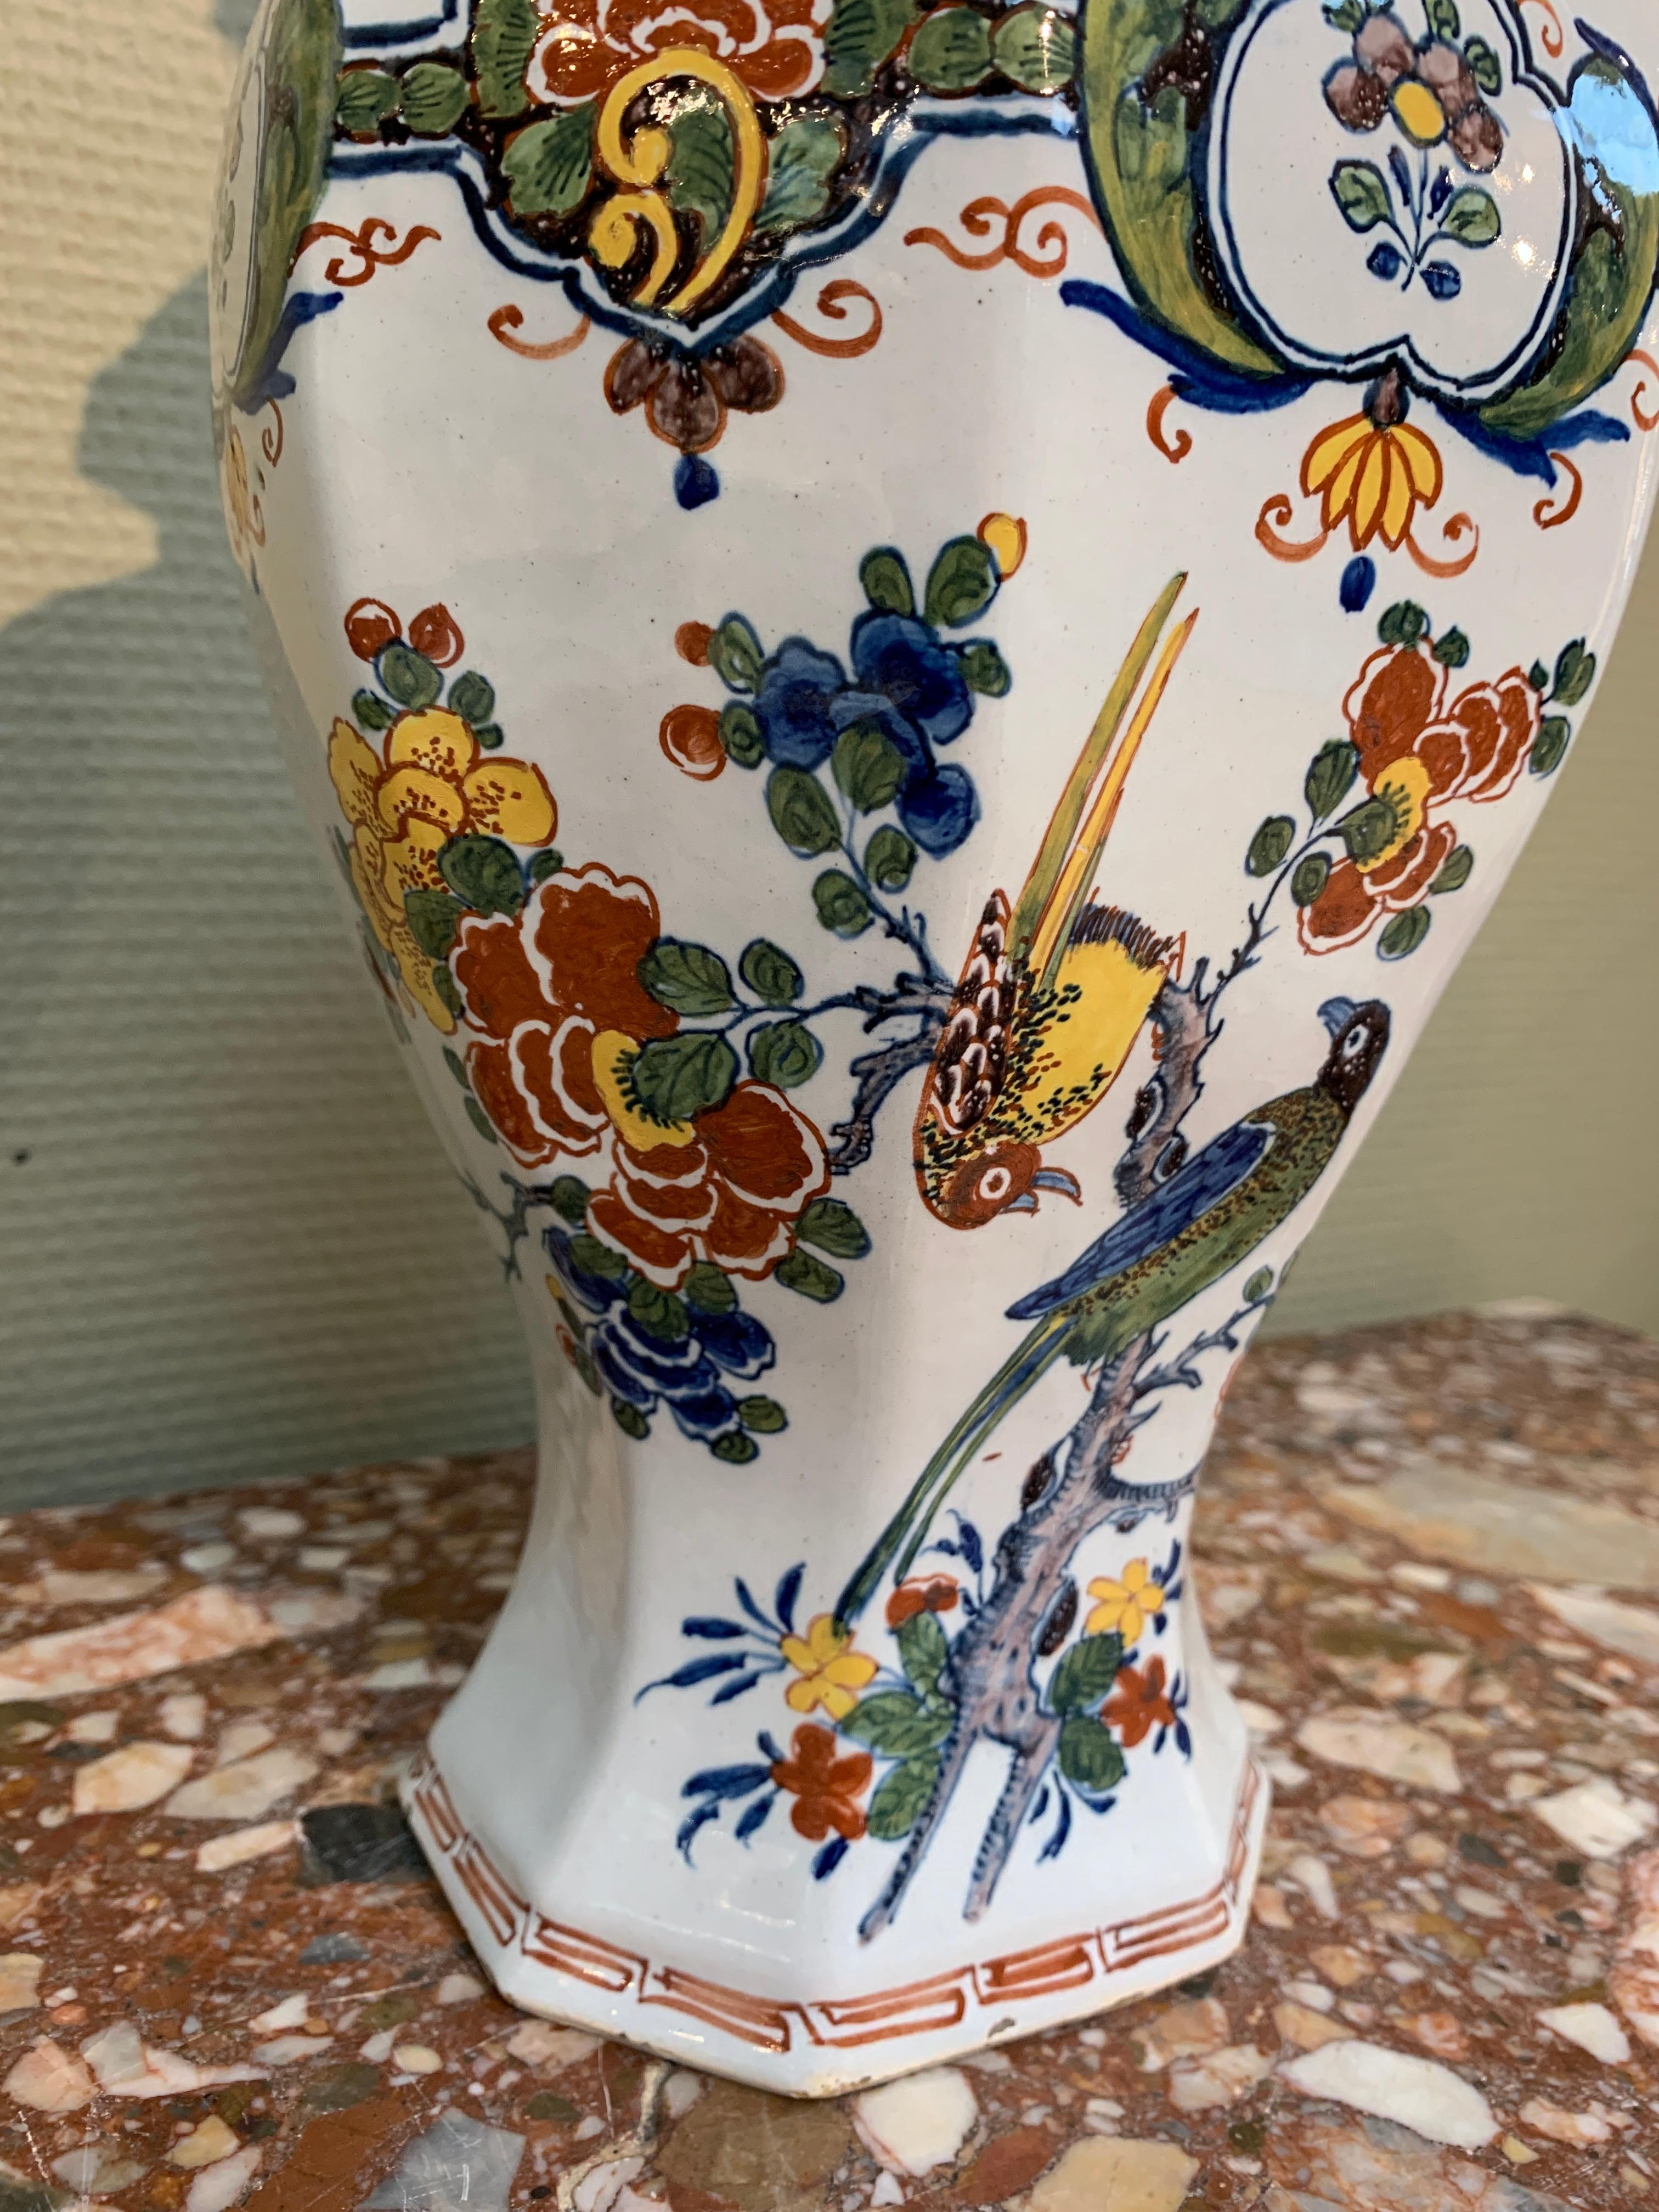 Rococo Dutch Delft Polychrome Vase with Flowers and Birds, Mid 18th Century For Sale